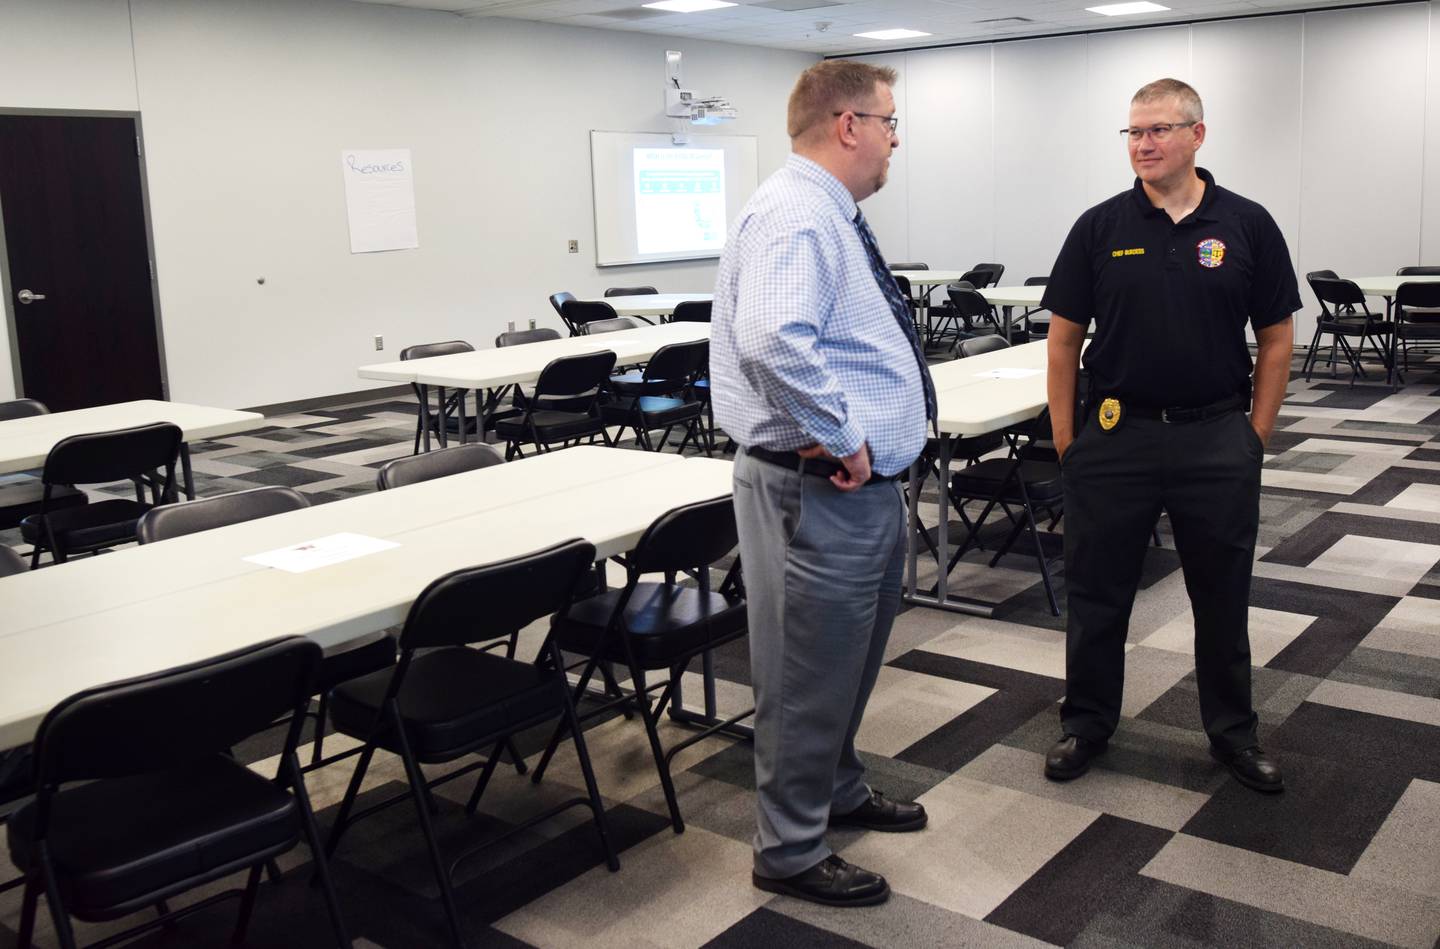 From left: Newton Superintendent Tom Messinger and Newton Police Chief Rob Burdess have a chat before guests arrive to the threat assessment training session June 9 at E.J.H. Beard Administration Center.